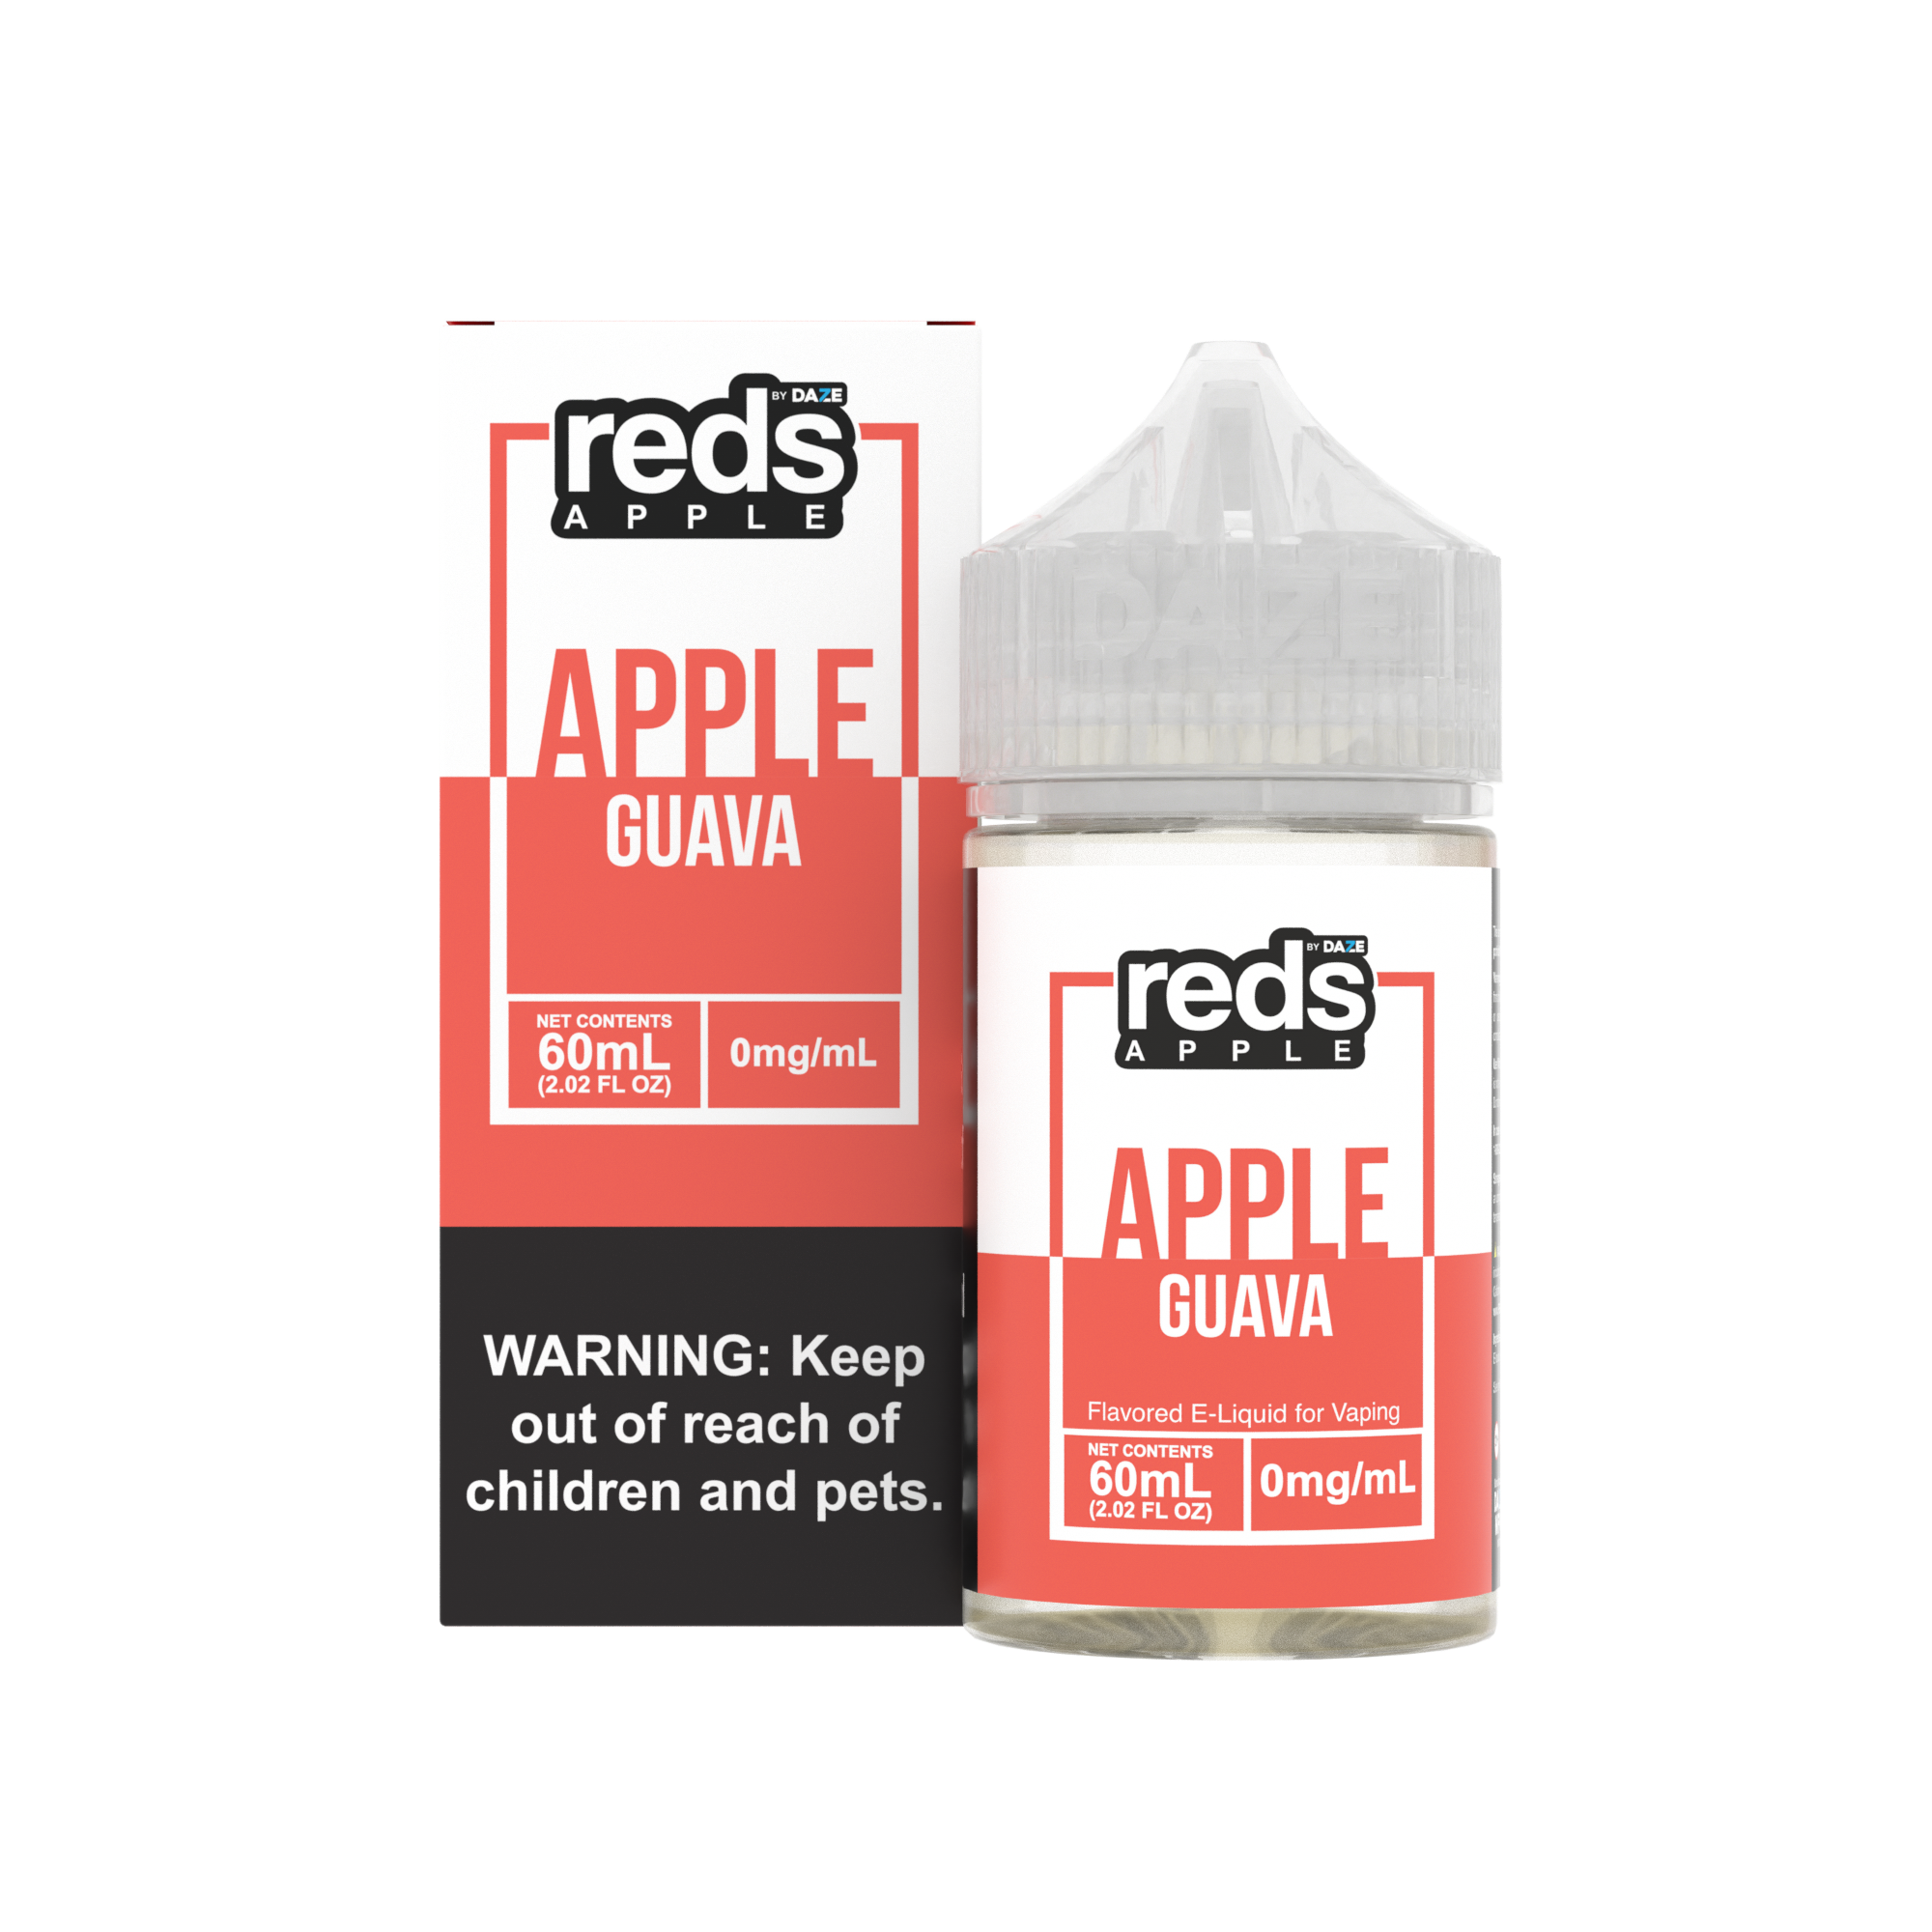 Reds-Guava-60ml-00mg-w-box.png